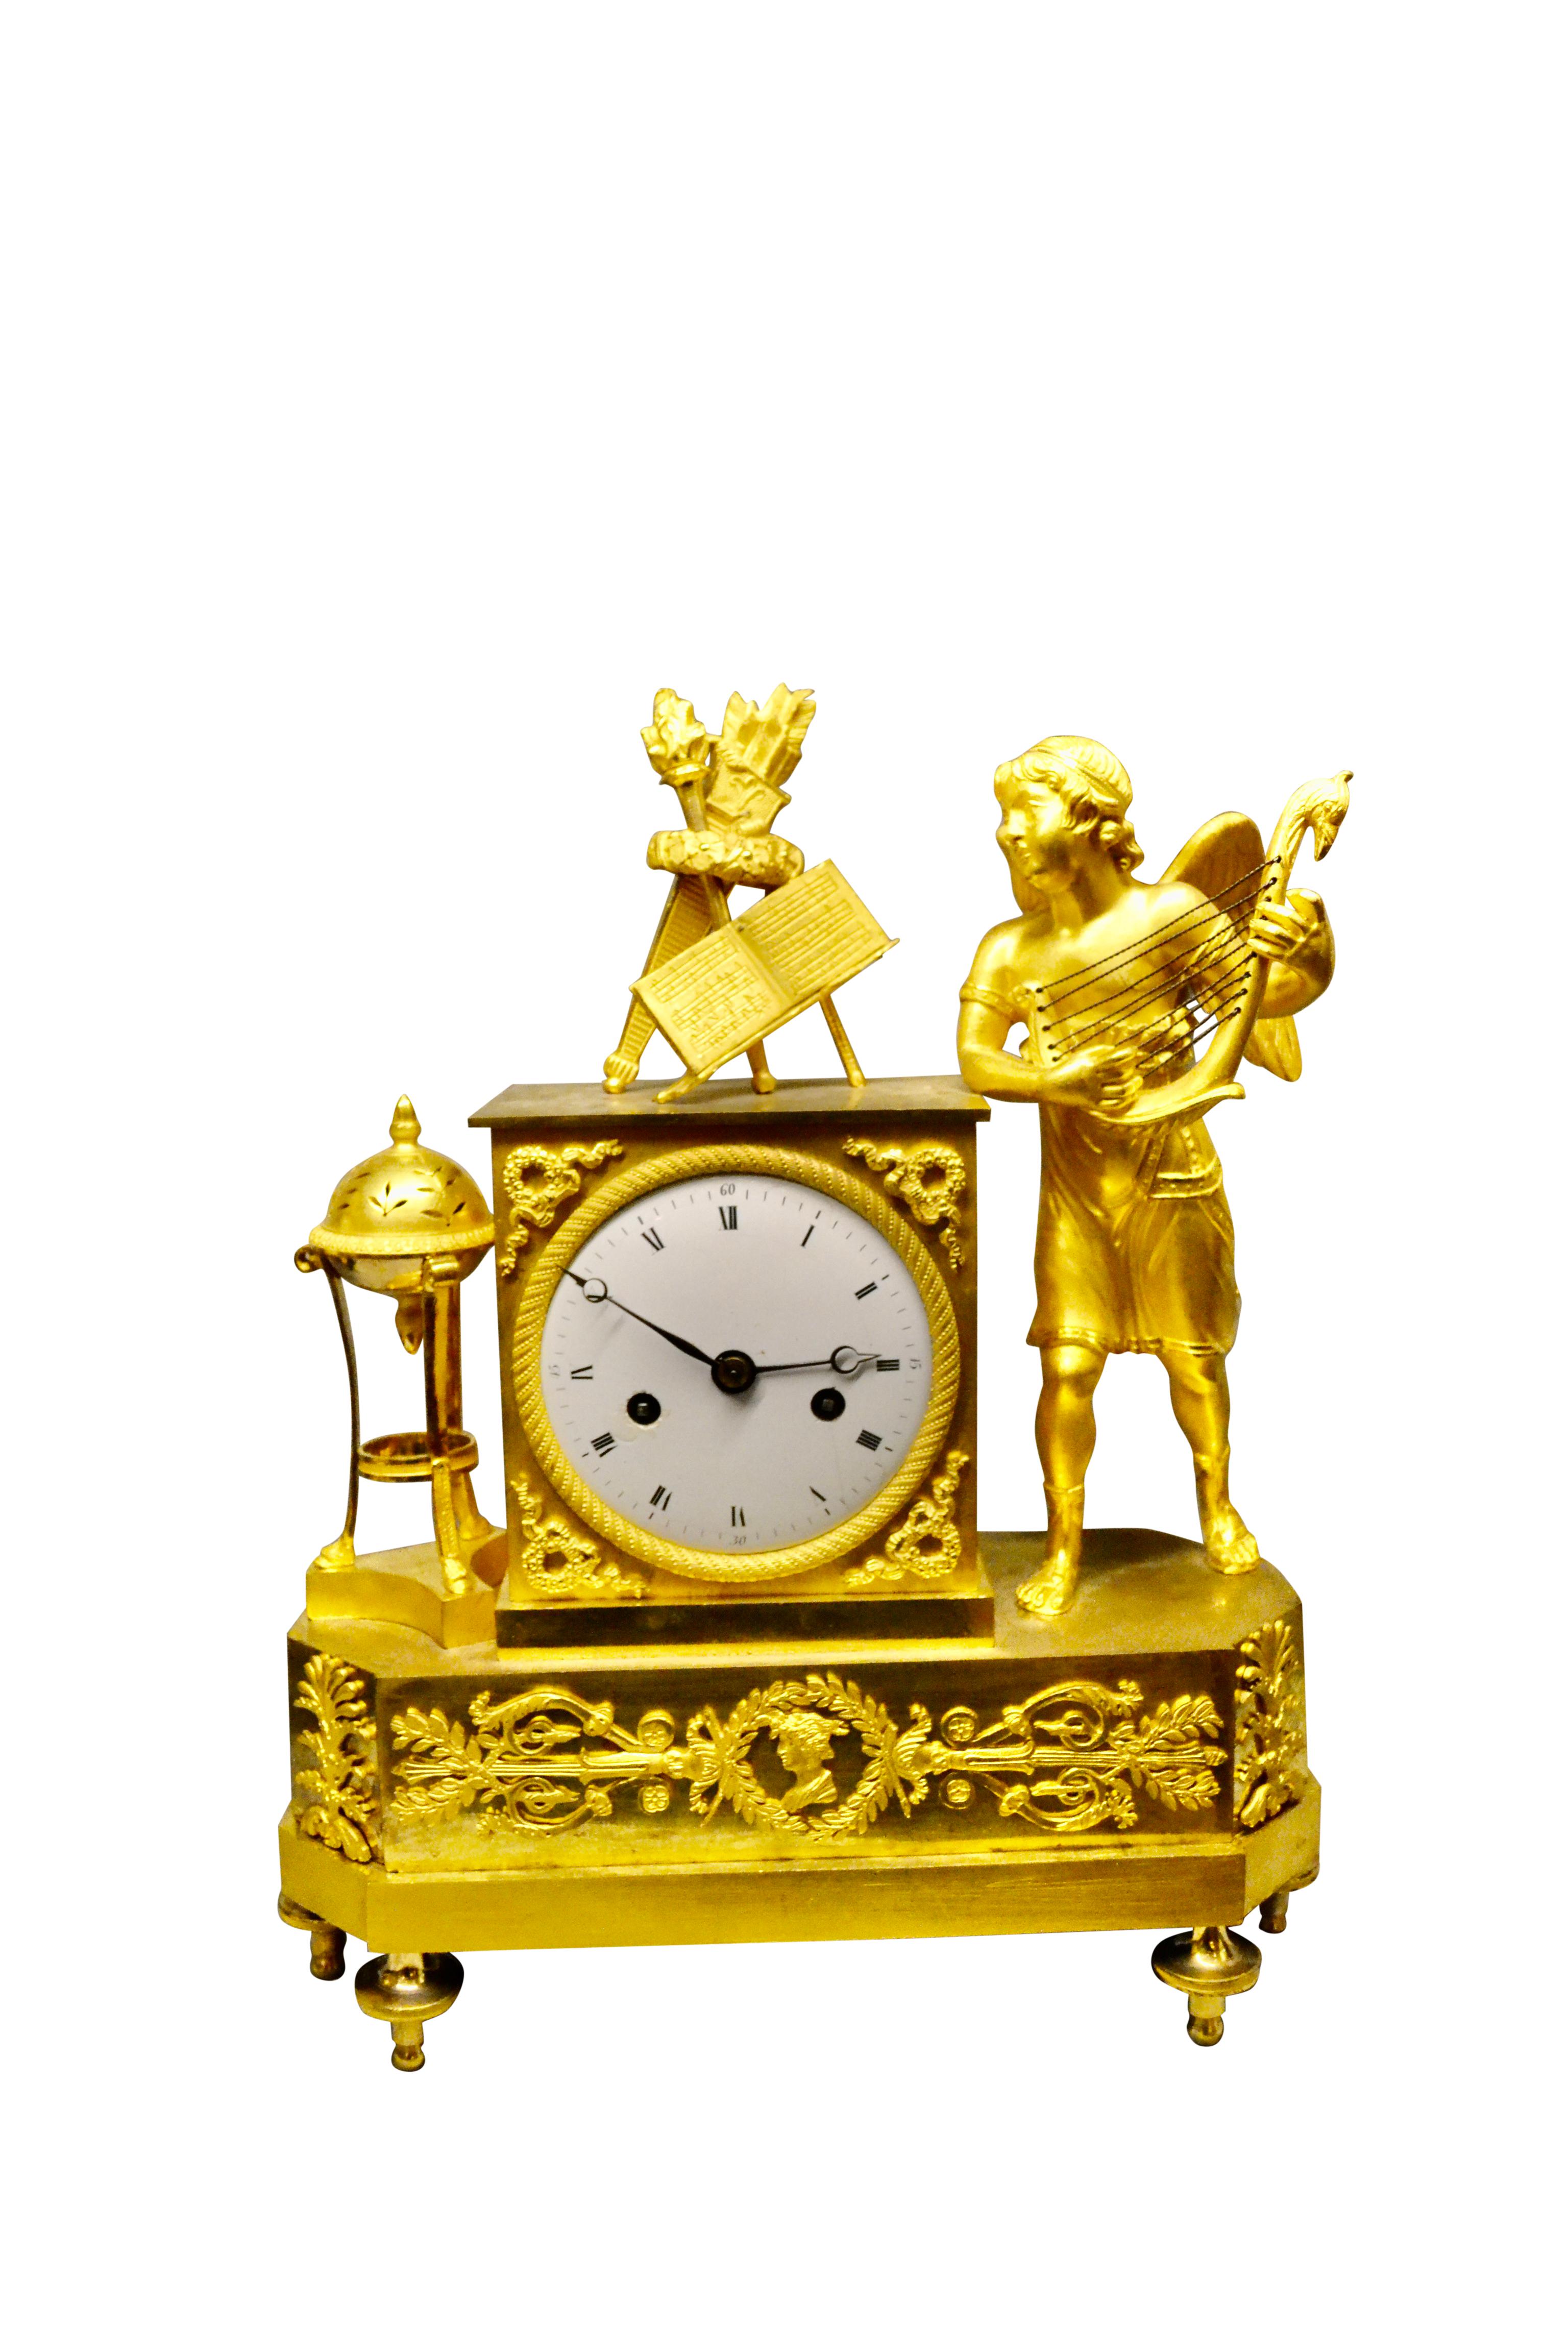 A fine quality chased and gilded French Empire mantle clock depicting a standing winged cupid to the right of the clock plinth playing a lute. He looks to his right reading his sheet music and other elements including a torch, flambeau, wreath etc.